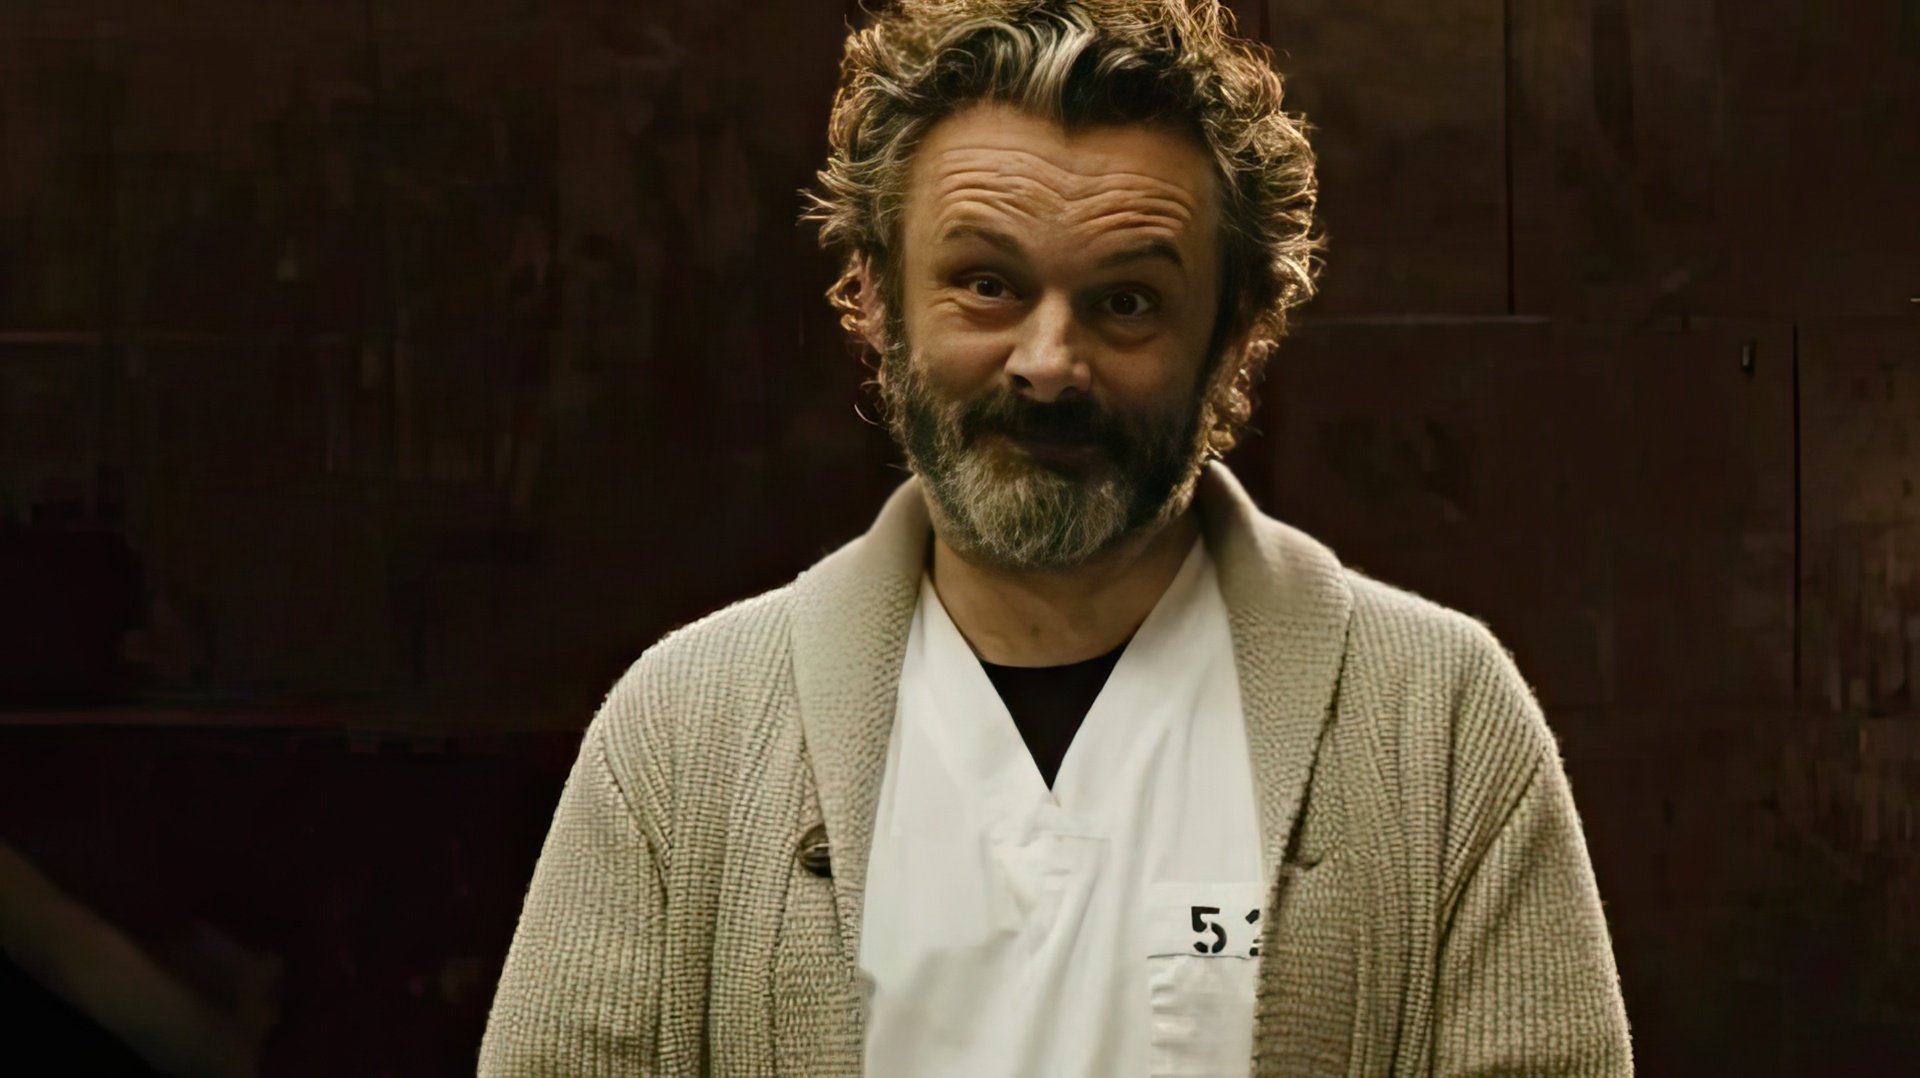 Michael Sheen in the series 'Prodigal Son'